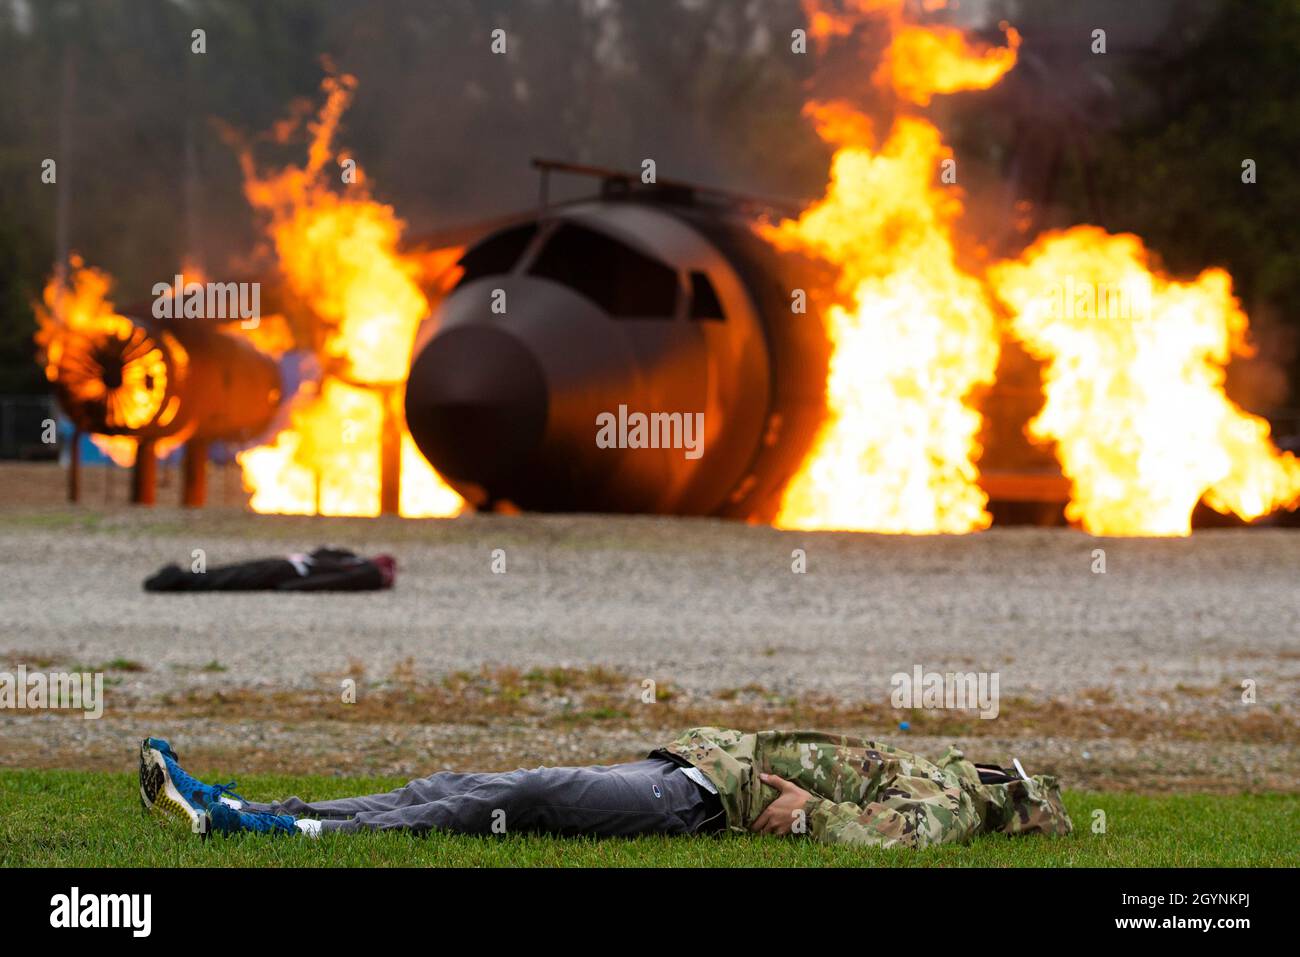 A role-player lays on the ground while a training fuselage burns at the scene of a simulated C-17 aircraft crash as part of a base exercise at Oct. 7, 2021, Wright-Patterson Air Force Base. Readiness exercises are routinely held to streamline unit cohesion when responding to emergencies. (U.S. Air Force photo by Wesley Farnsworth) Stock Photo